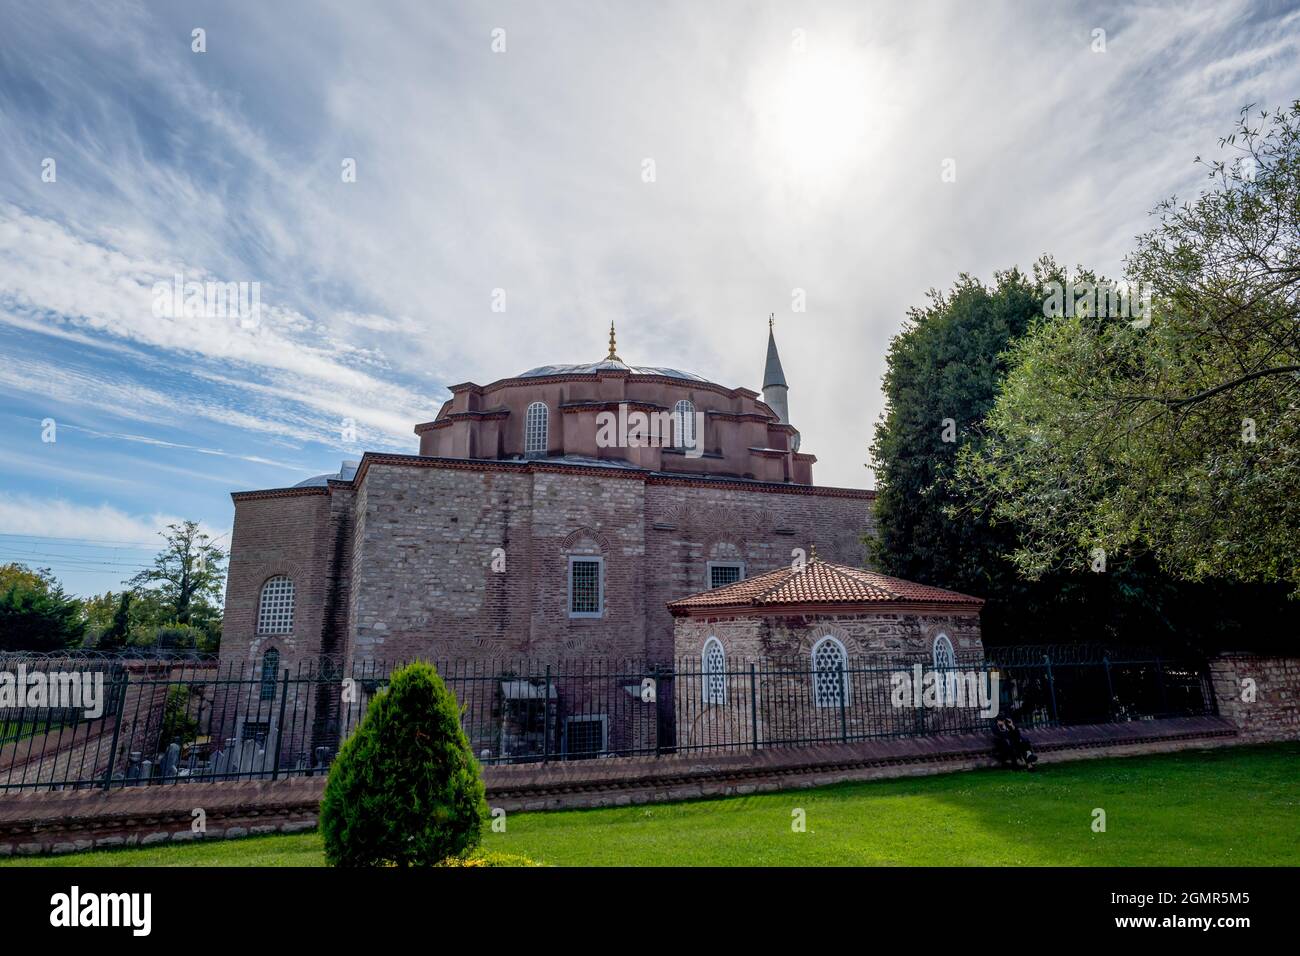 Little Hagia Sophia, Church of Saints Sergius and Bacchus, architecture and exterior photo taken in Istanbul, Turkey Stock Photo